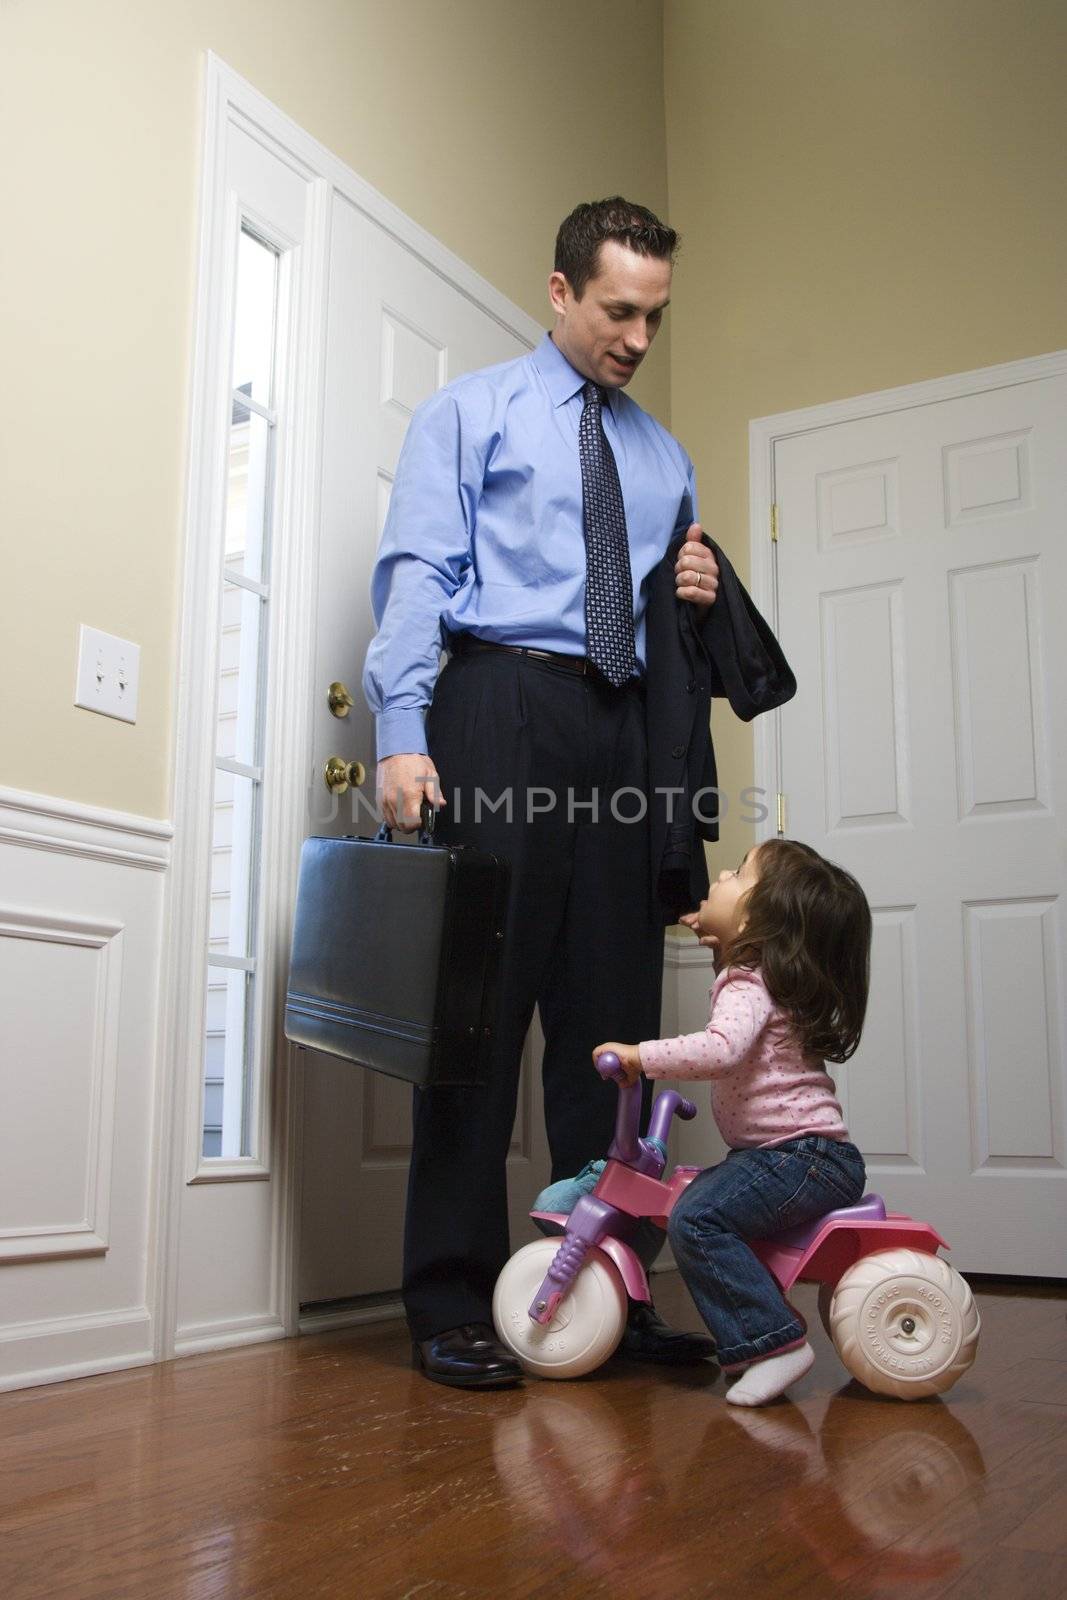 Caucasian businessman at door with briefcase with daughter looking up at him.